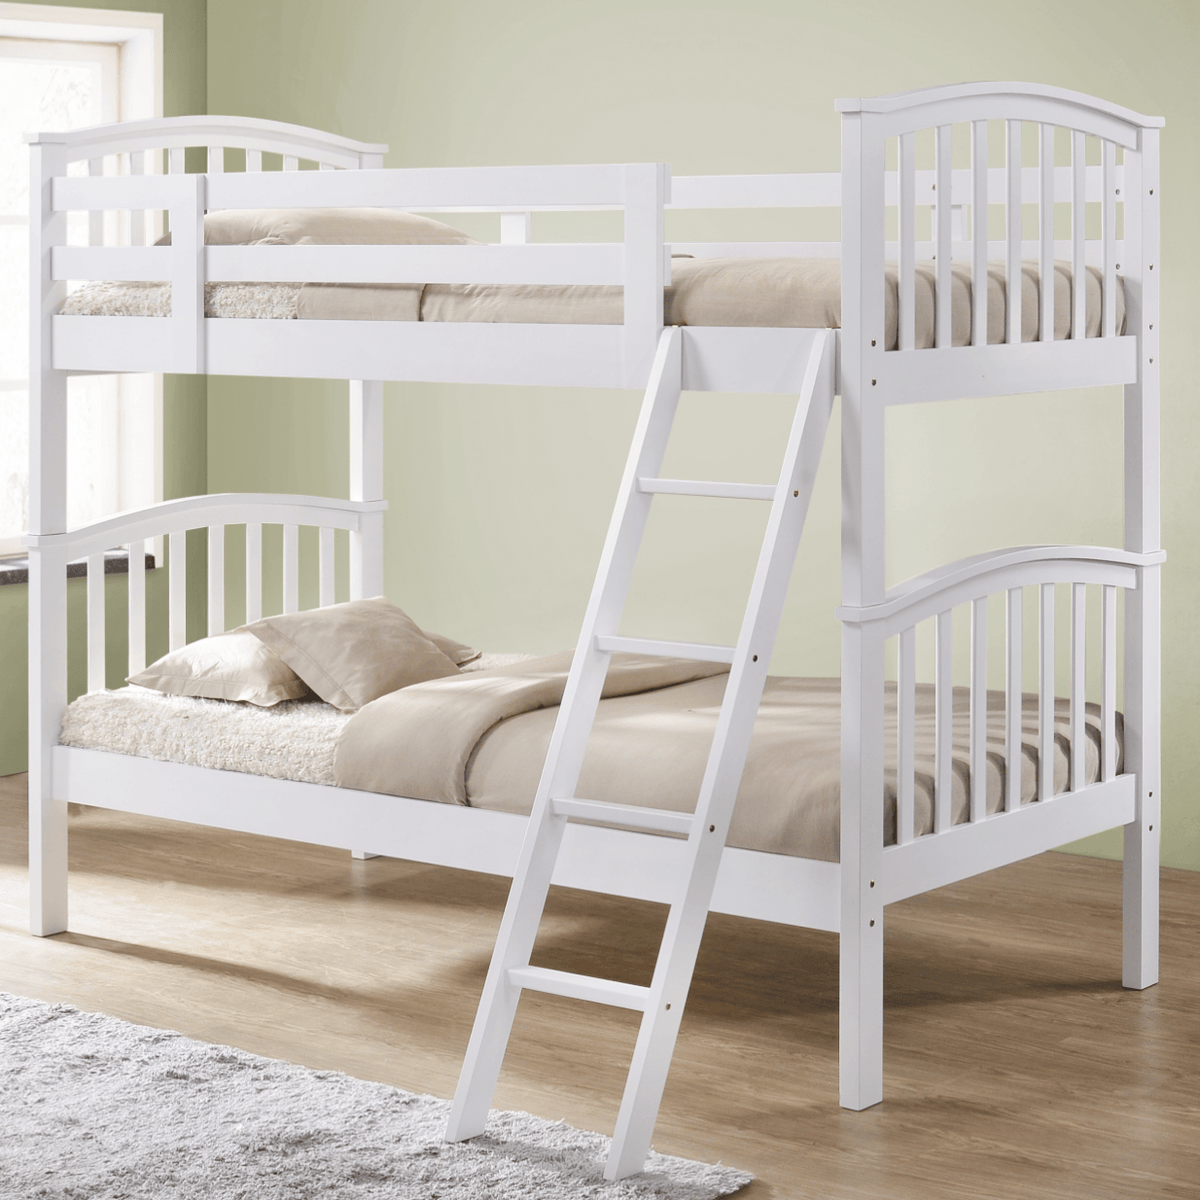 White Wooden Curved Bunk Bed Frame